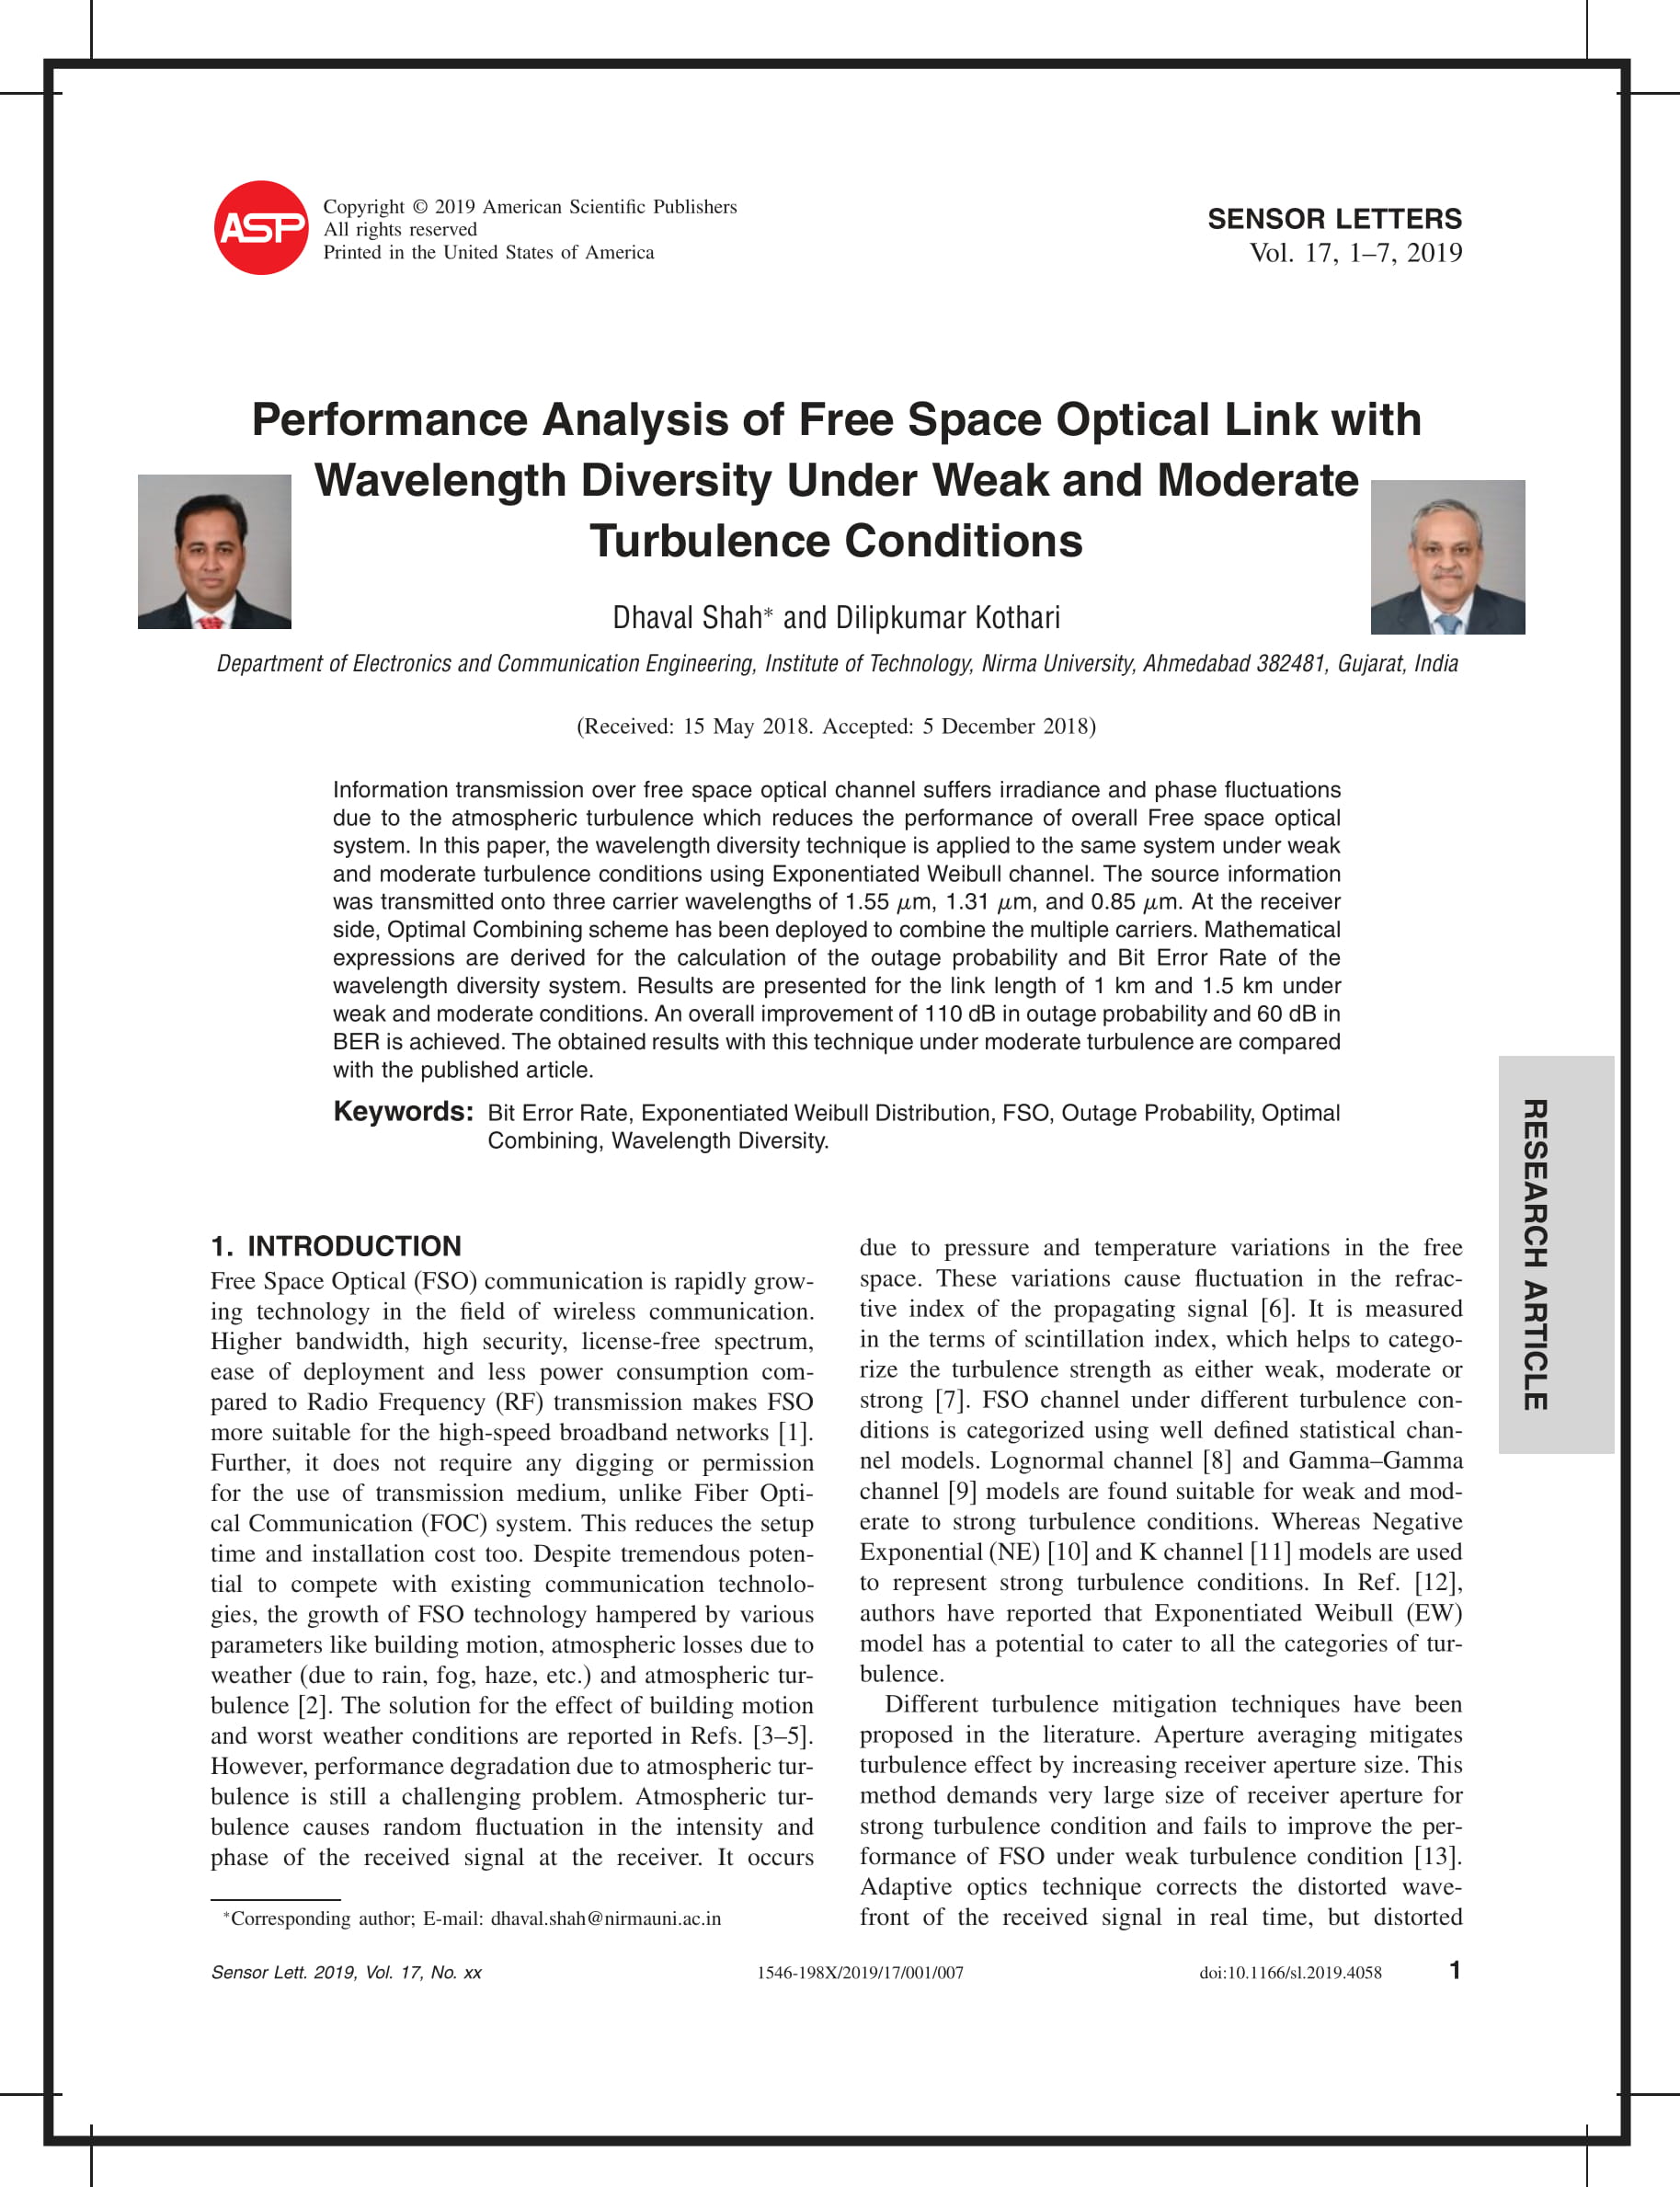 Performance Analysis of Free Space Optical Link with Wavelength Diversity under Weak and Moderate Turbulence Conditions